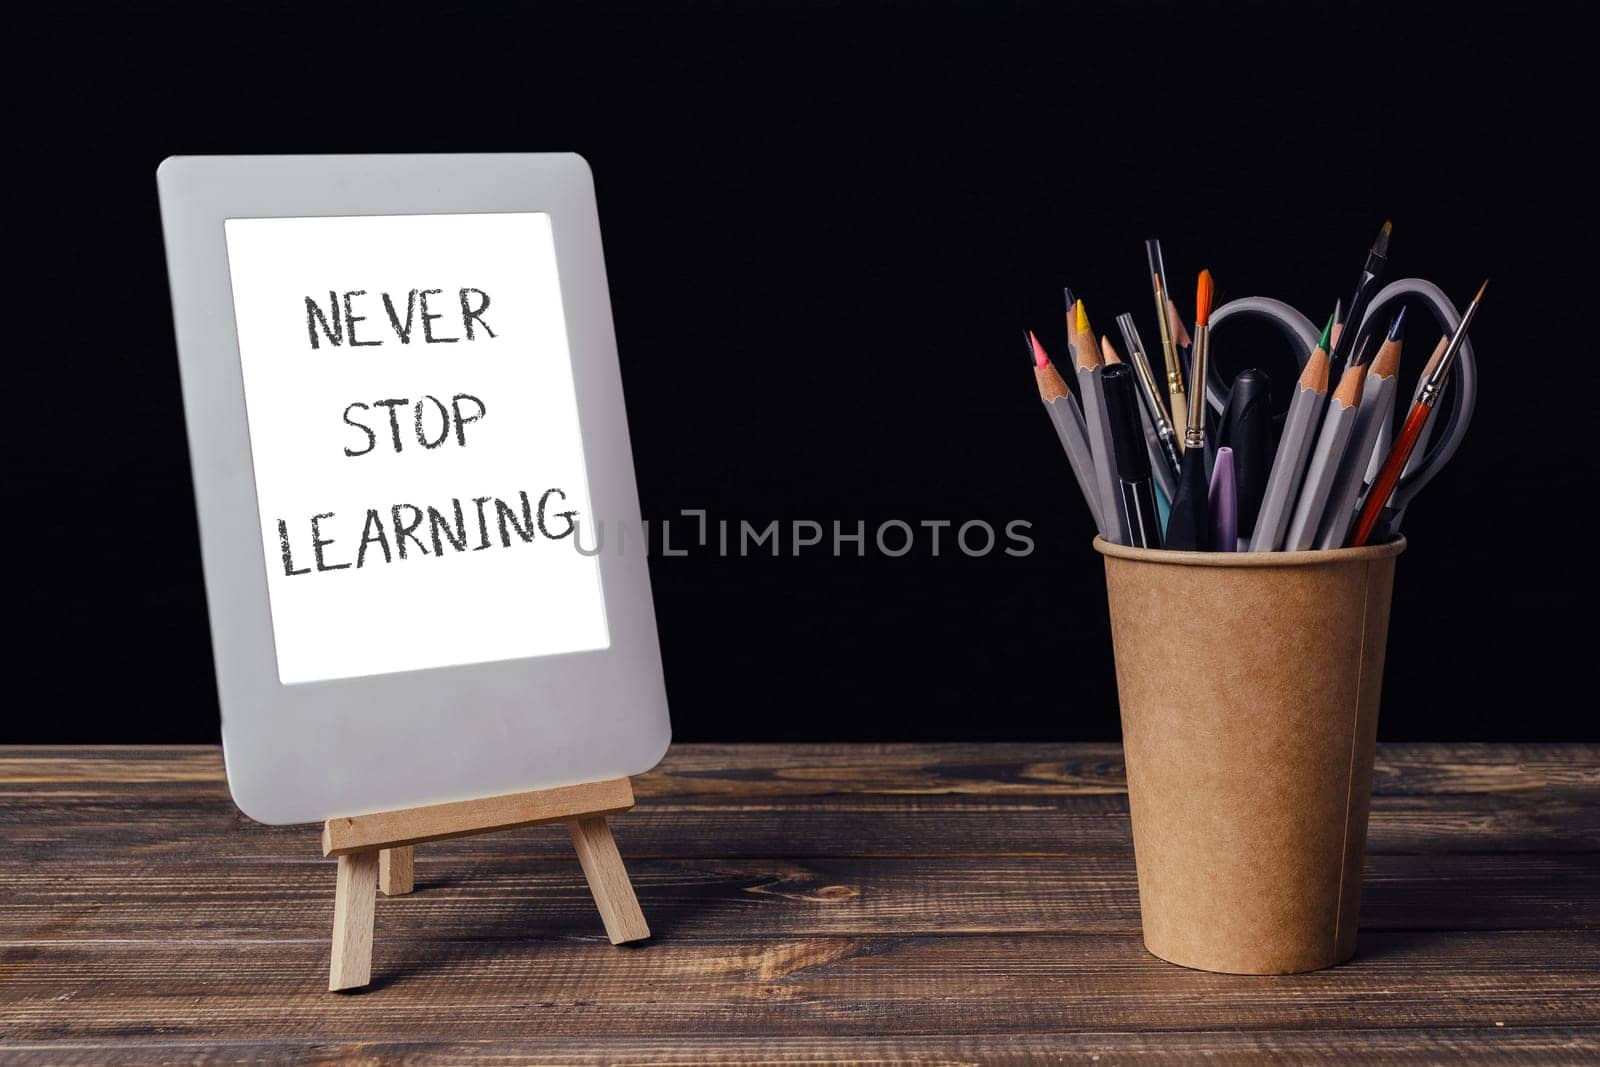 Never stop learning is written on a white sign. A wooden stand holds a white tablet and a cup of pencils